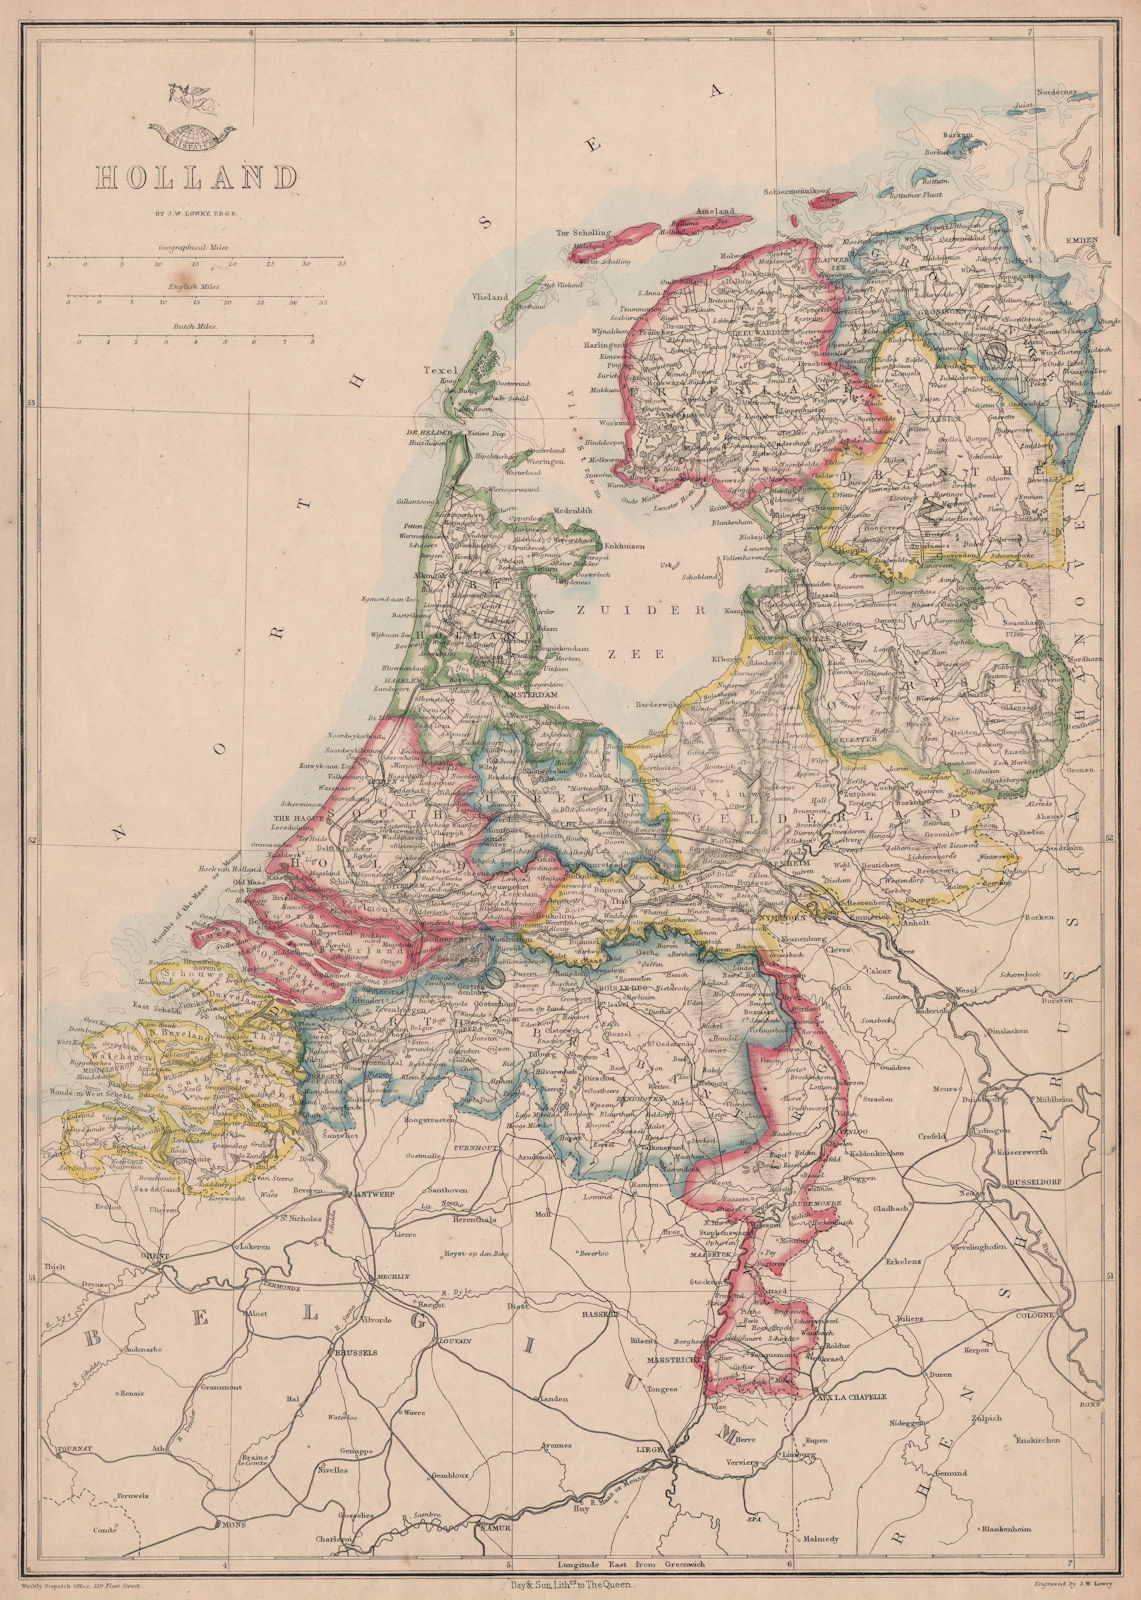 'Holland'. Netherlands in provinces. JW LOWRY for the Dispatch atlas 1863 map